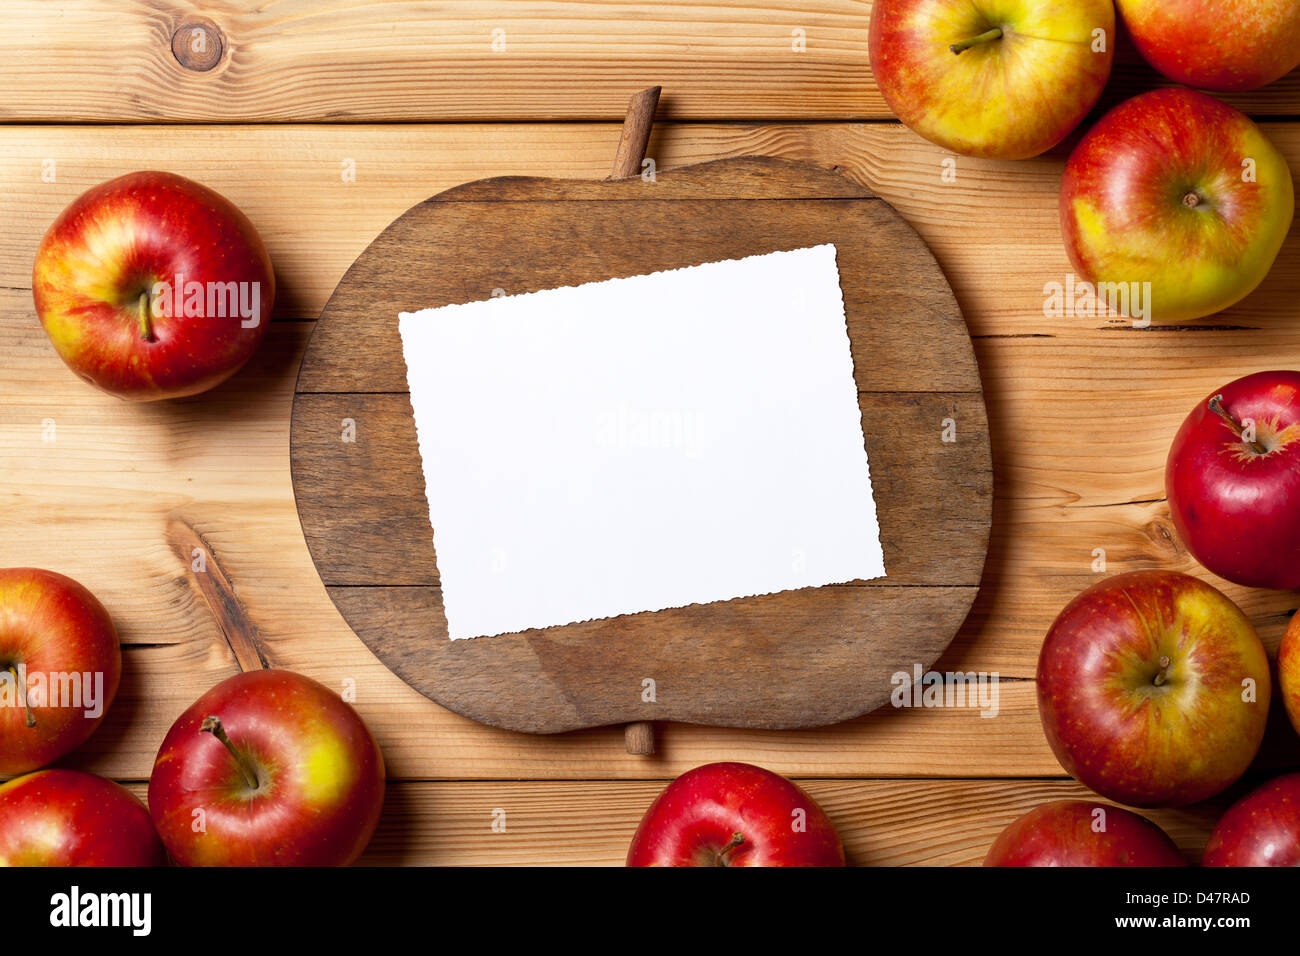 Fresh apples composition on wooden background with empty room for text Stock Photo